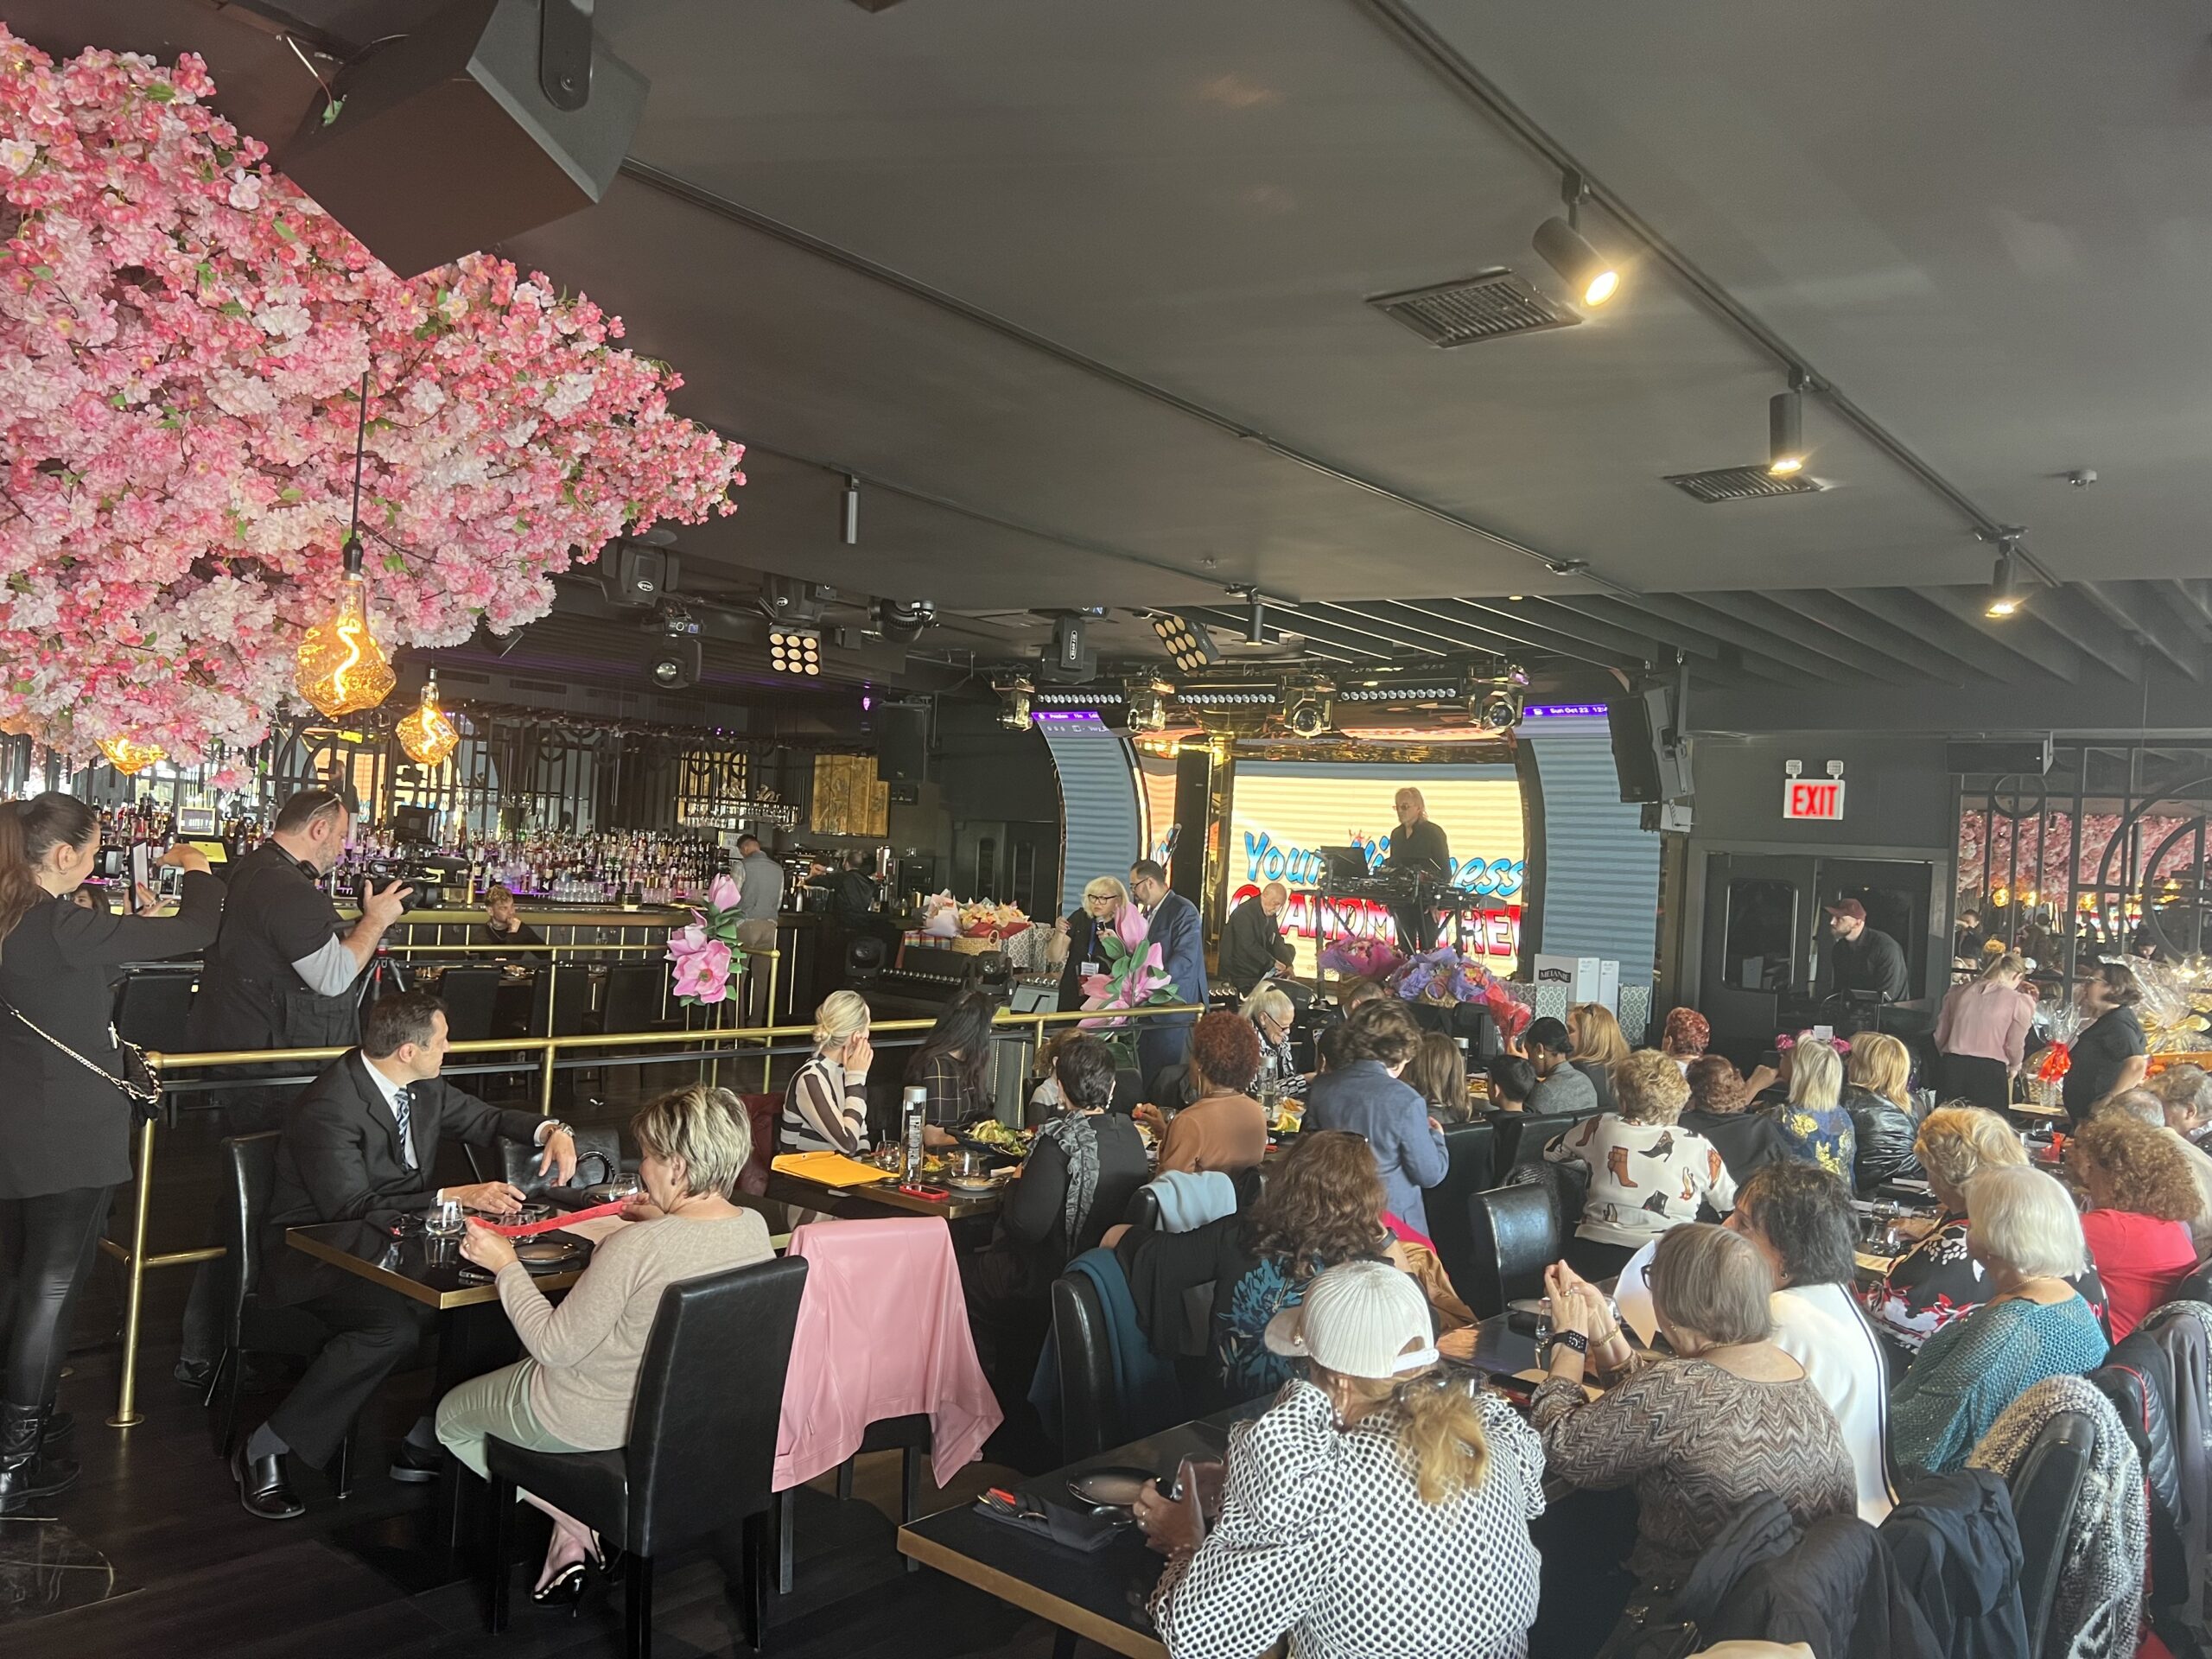 The 22nd annual “Your Highness Grandmother” Pageant, held this past Sunday at the Sky Wise Lounge in Sheepshead Bay, brought in a capacity crowd.Photo: Wayne Daren Schneiderman/Brooklyn Eagle